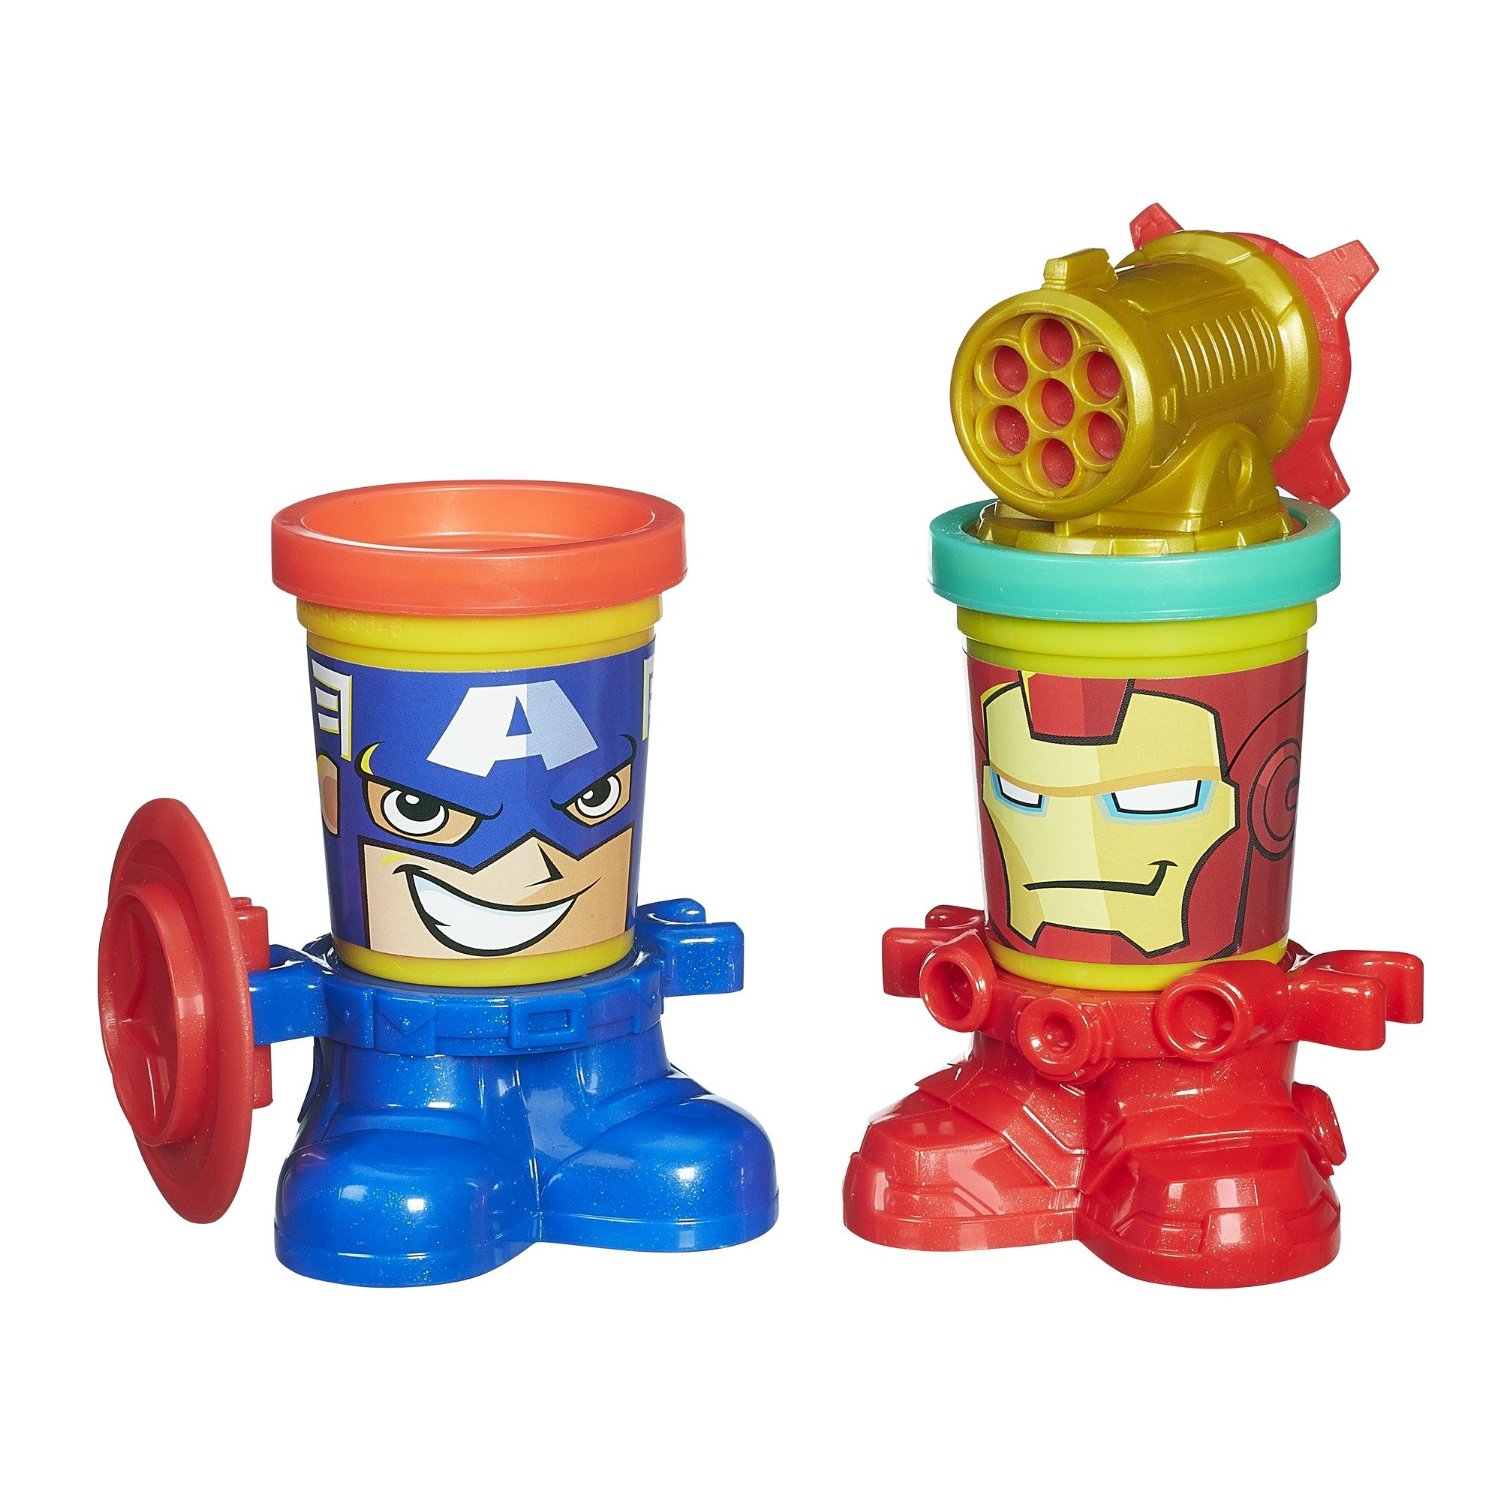 Amazon PlayDoh Sale! Items Starting At 4.99! The